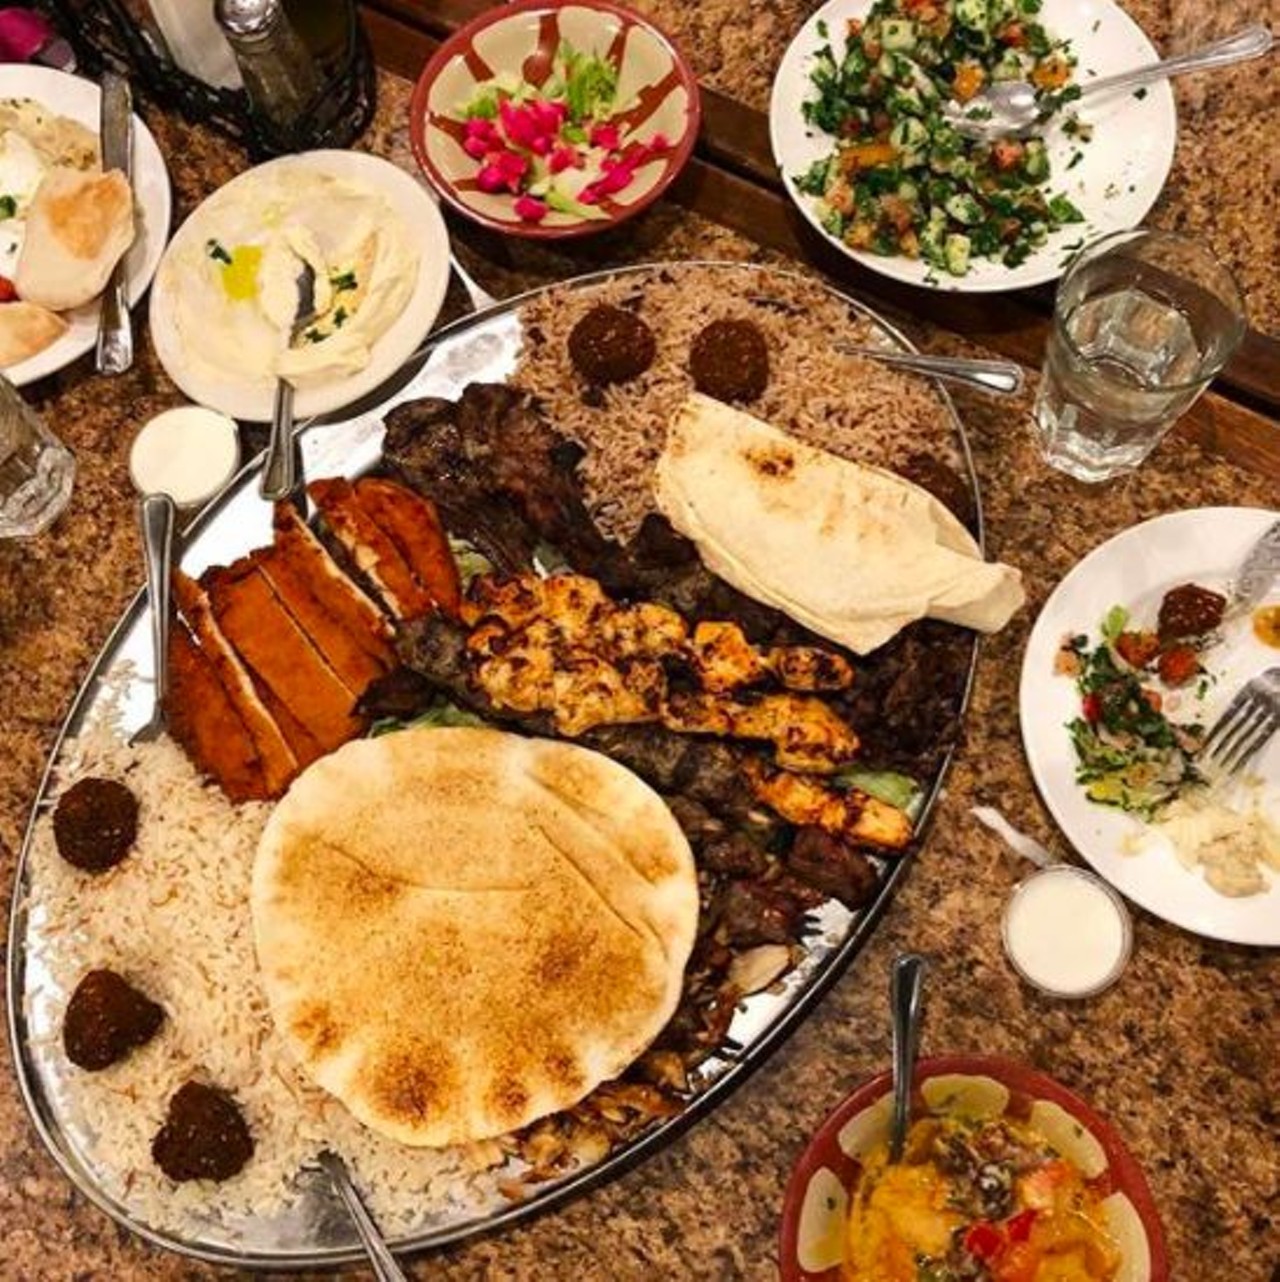 Al Ameer
12710 W. Warren Ave., Dearborn; 313-582-8185
A hotspot for authentic Mediterranean cuisine with lamb, shawarma, pitas, falafel, hummus, tabbouli, fattoush, and so much more. There are entrees, sandwiches and a raw juice bar &#151; all served in a cozy space. 
Photo via Instagram user @hillarydixlercanavan